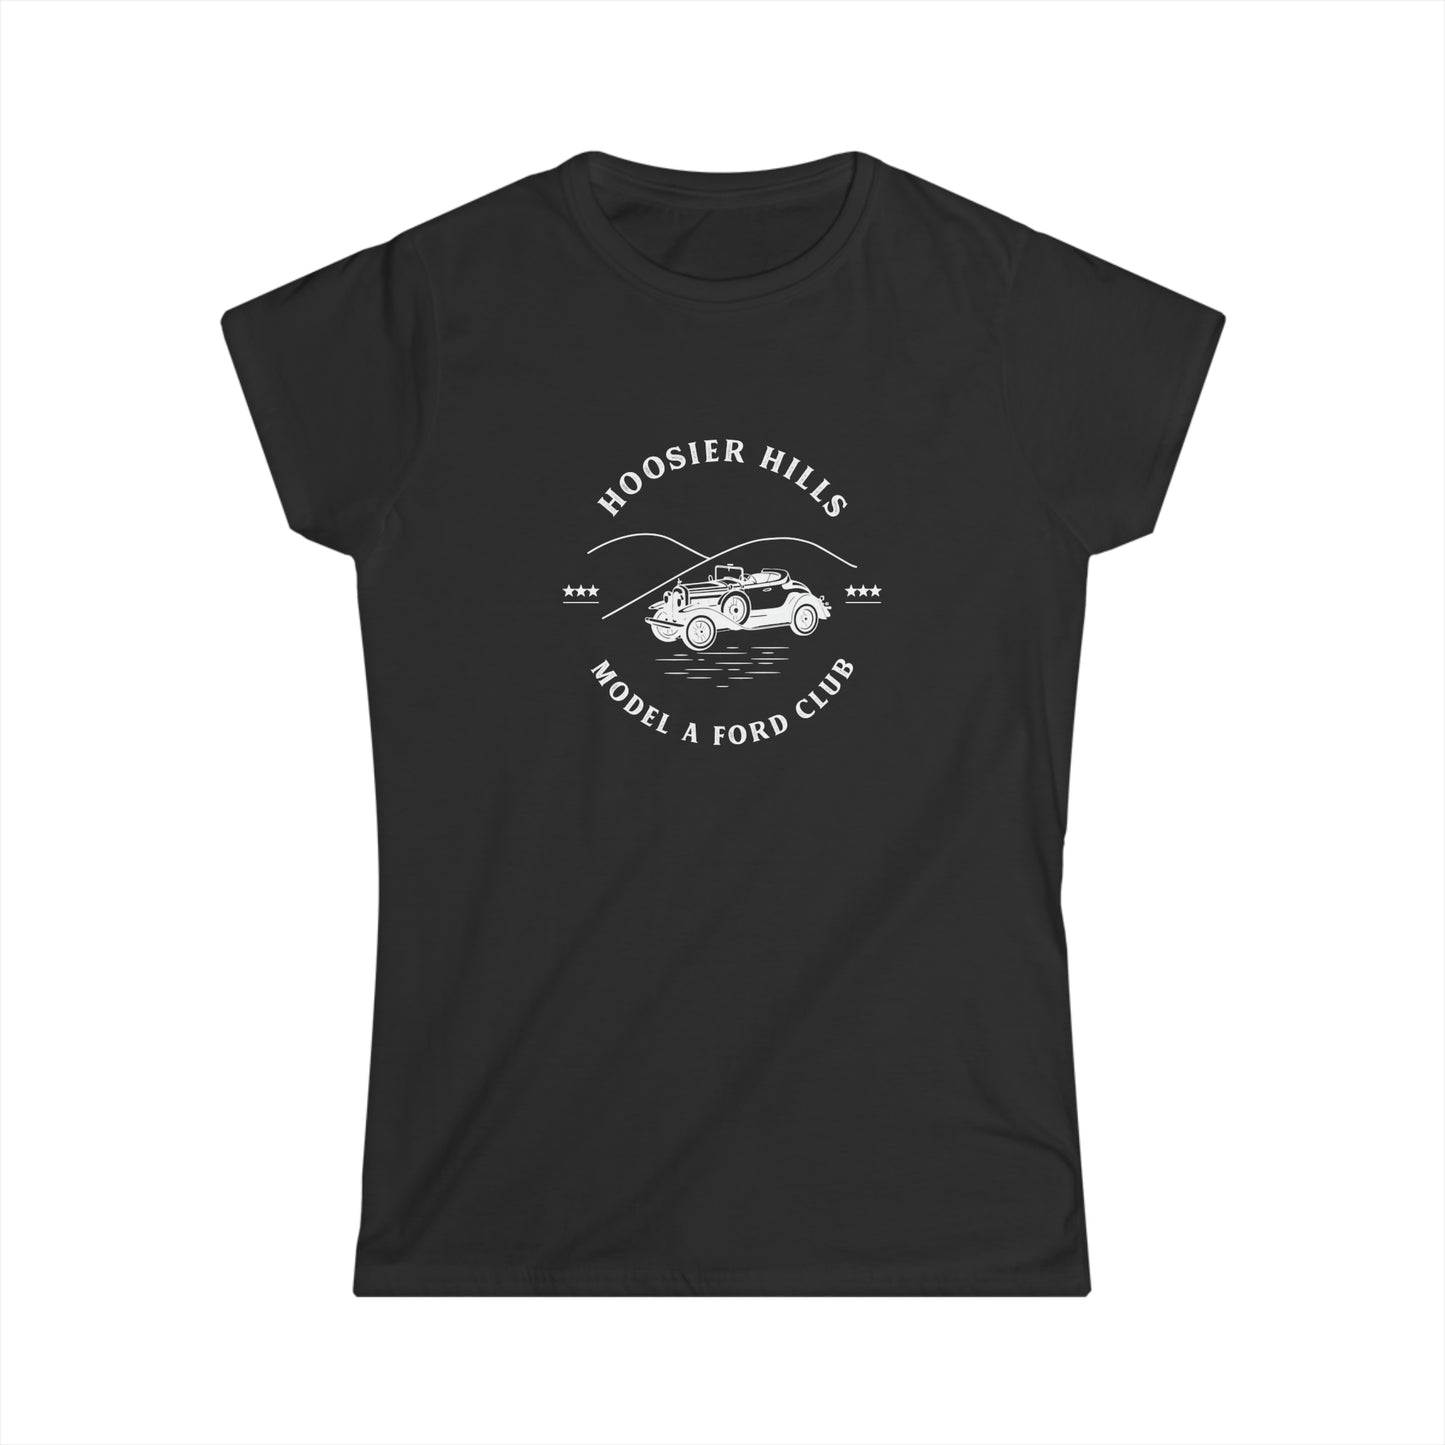 Hoosier Hills Model A Ford Club Women's Softstyle Tee